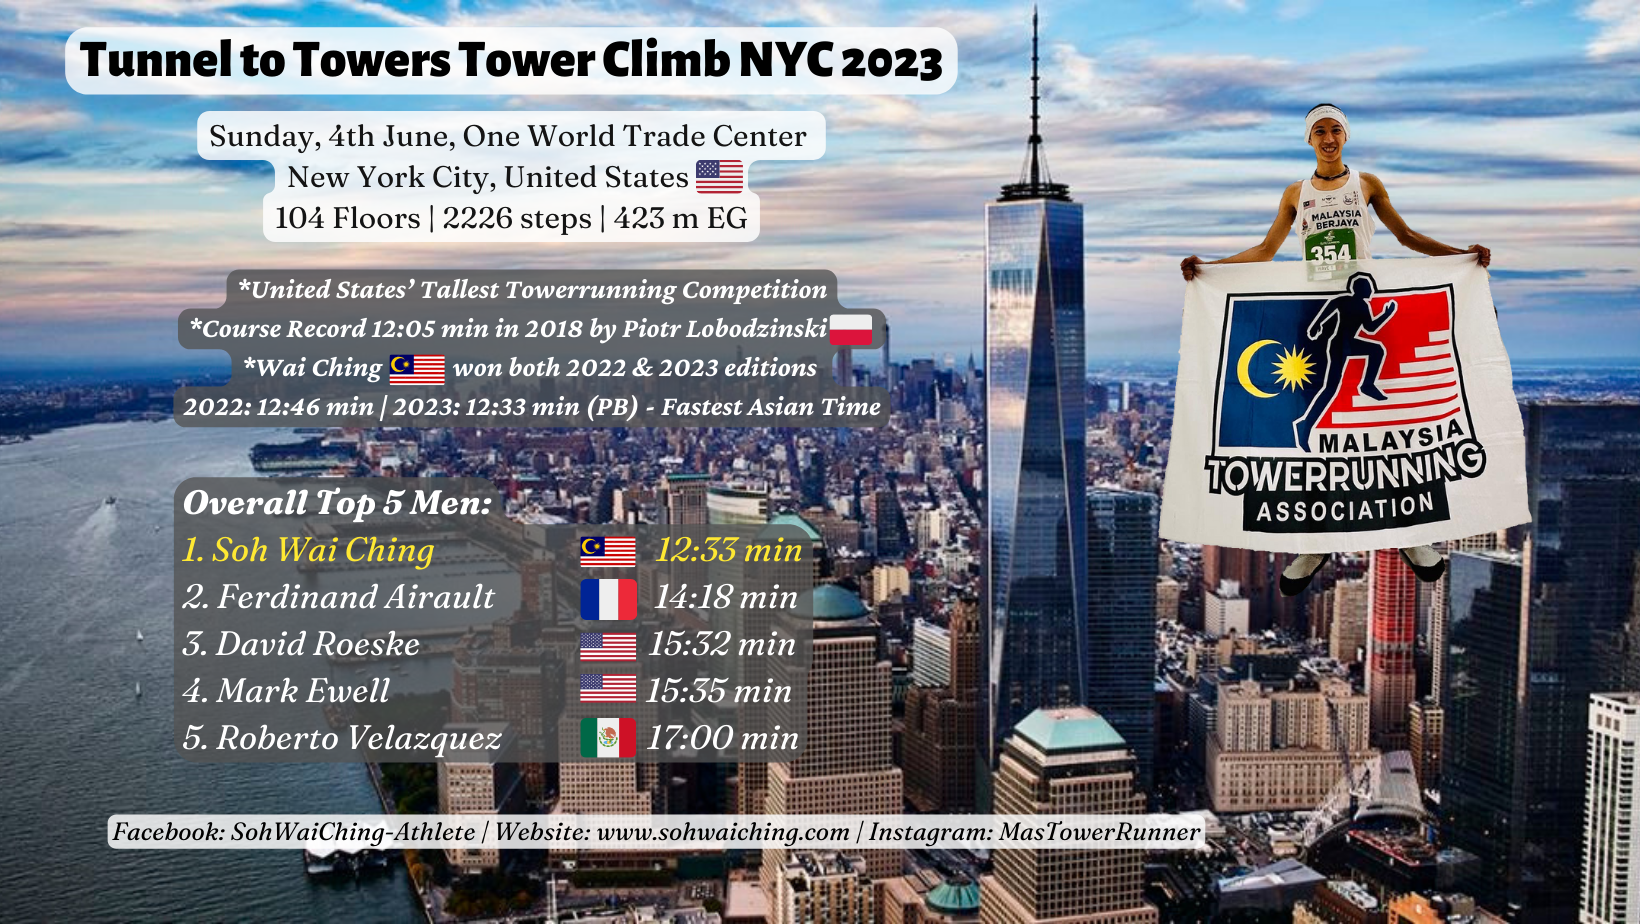 Tunnel to Towers Tower Climb NYC - One World Trade Center New York 2023